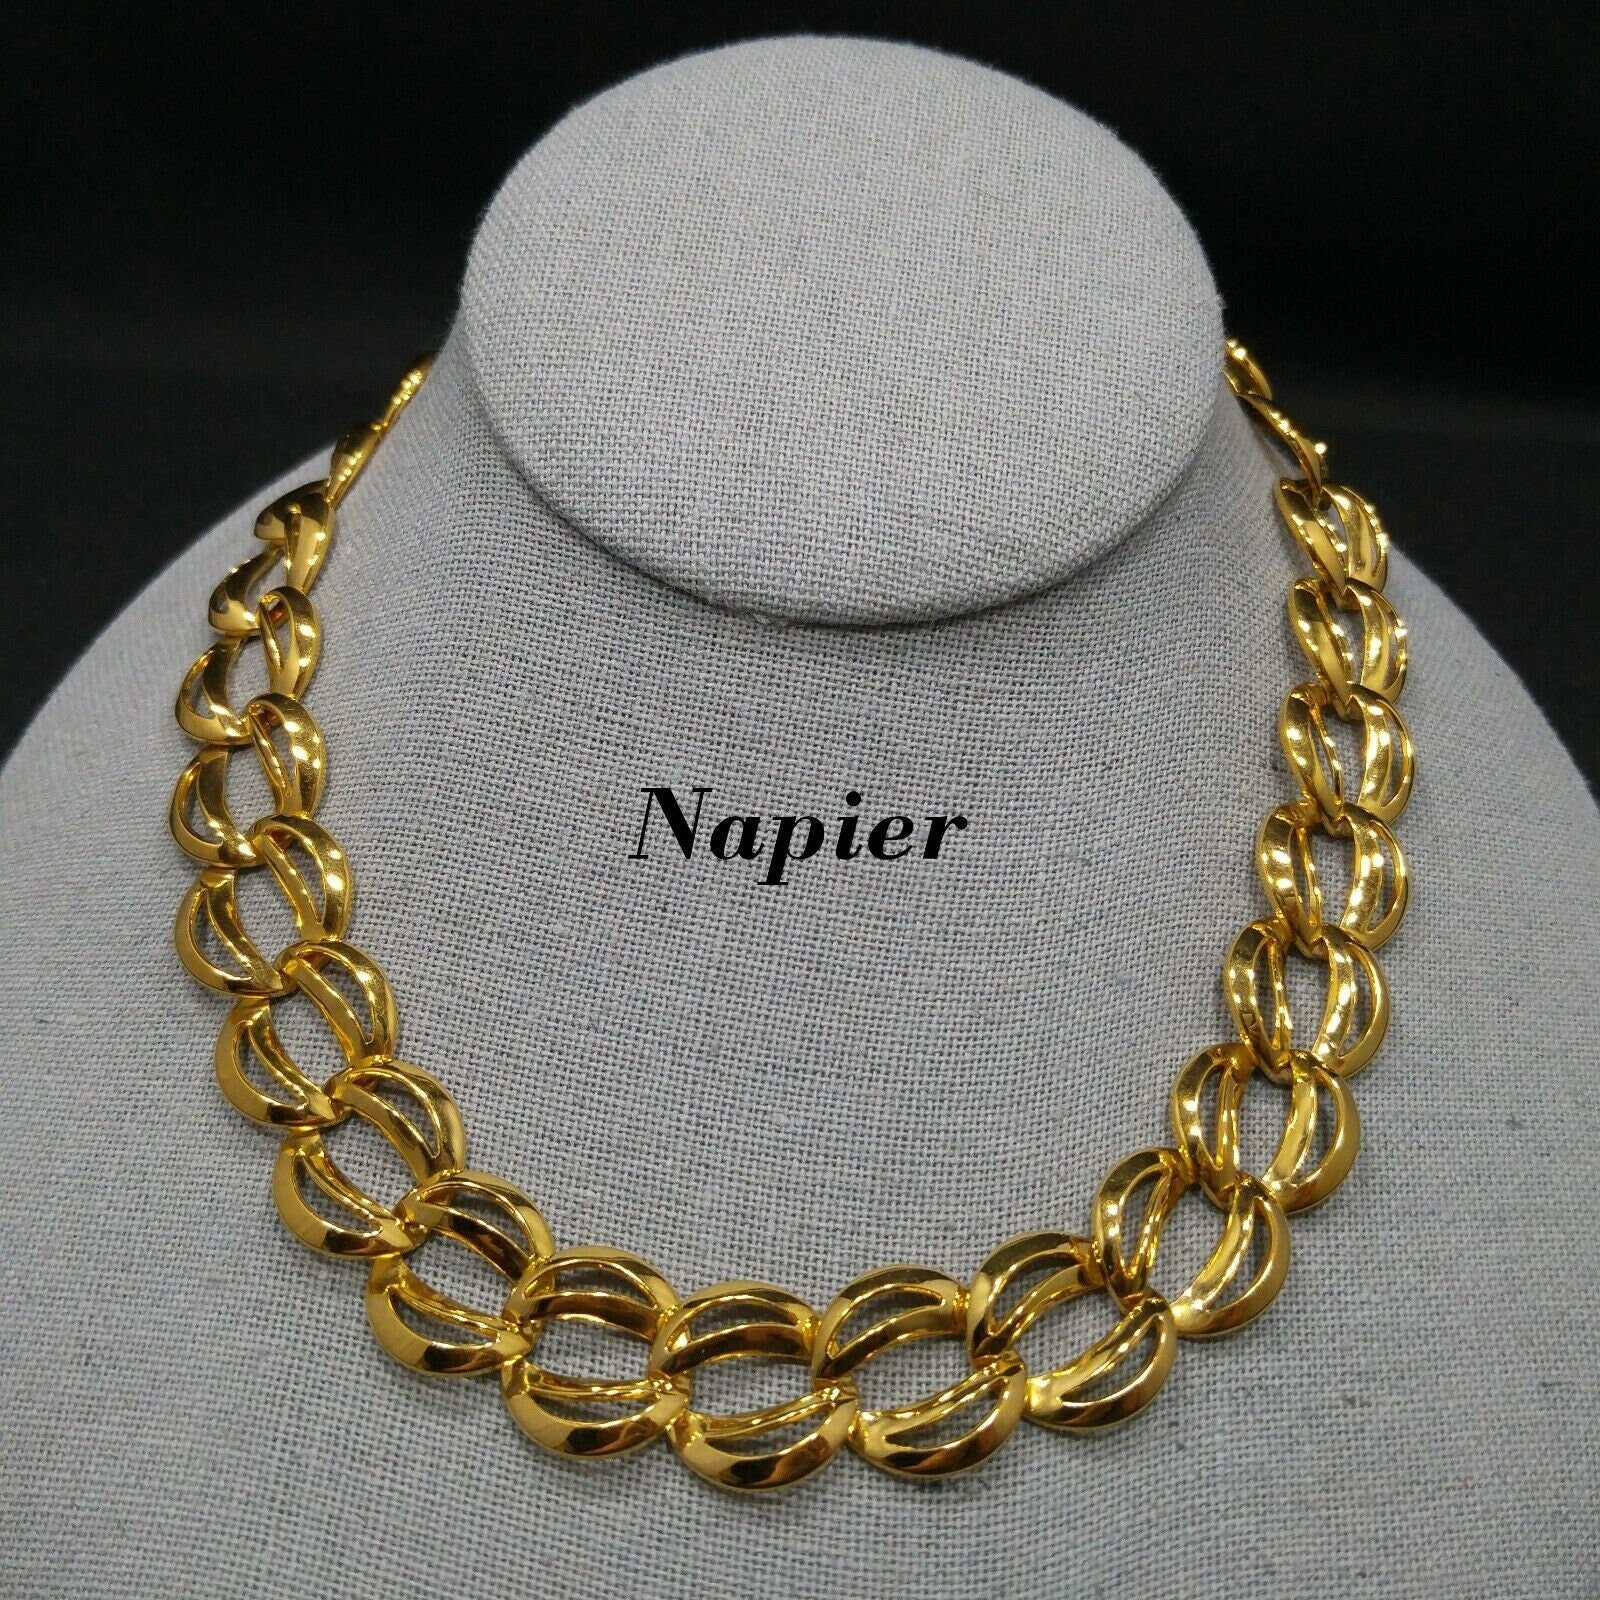 Napier Gold Tone Braided Chain Necklace